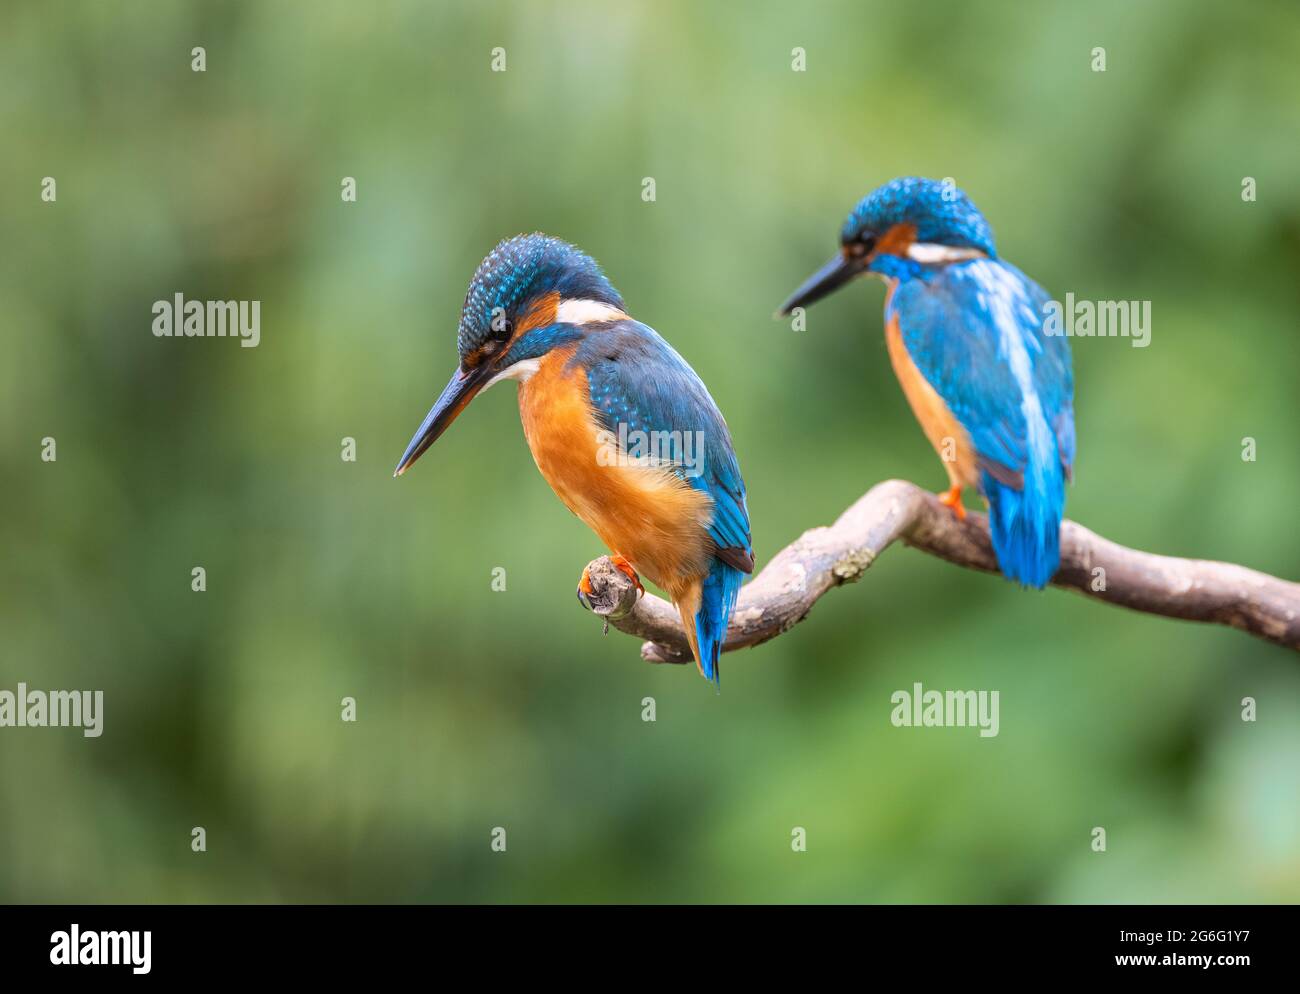 Kingfishers in the UK countryside Stock Photo